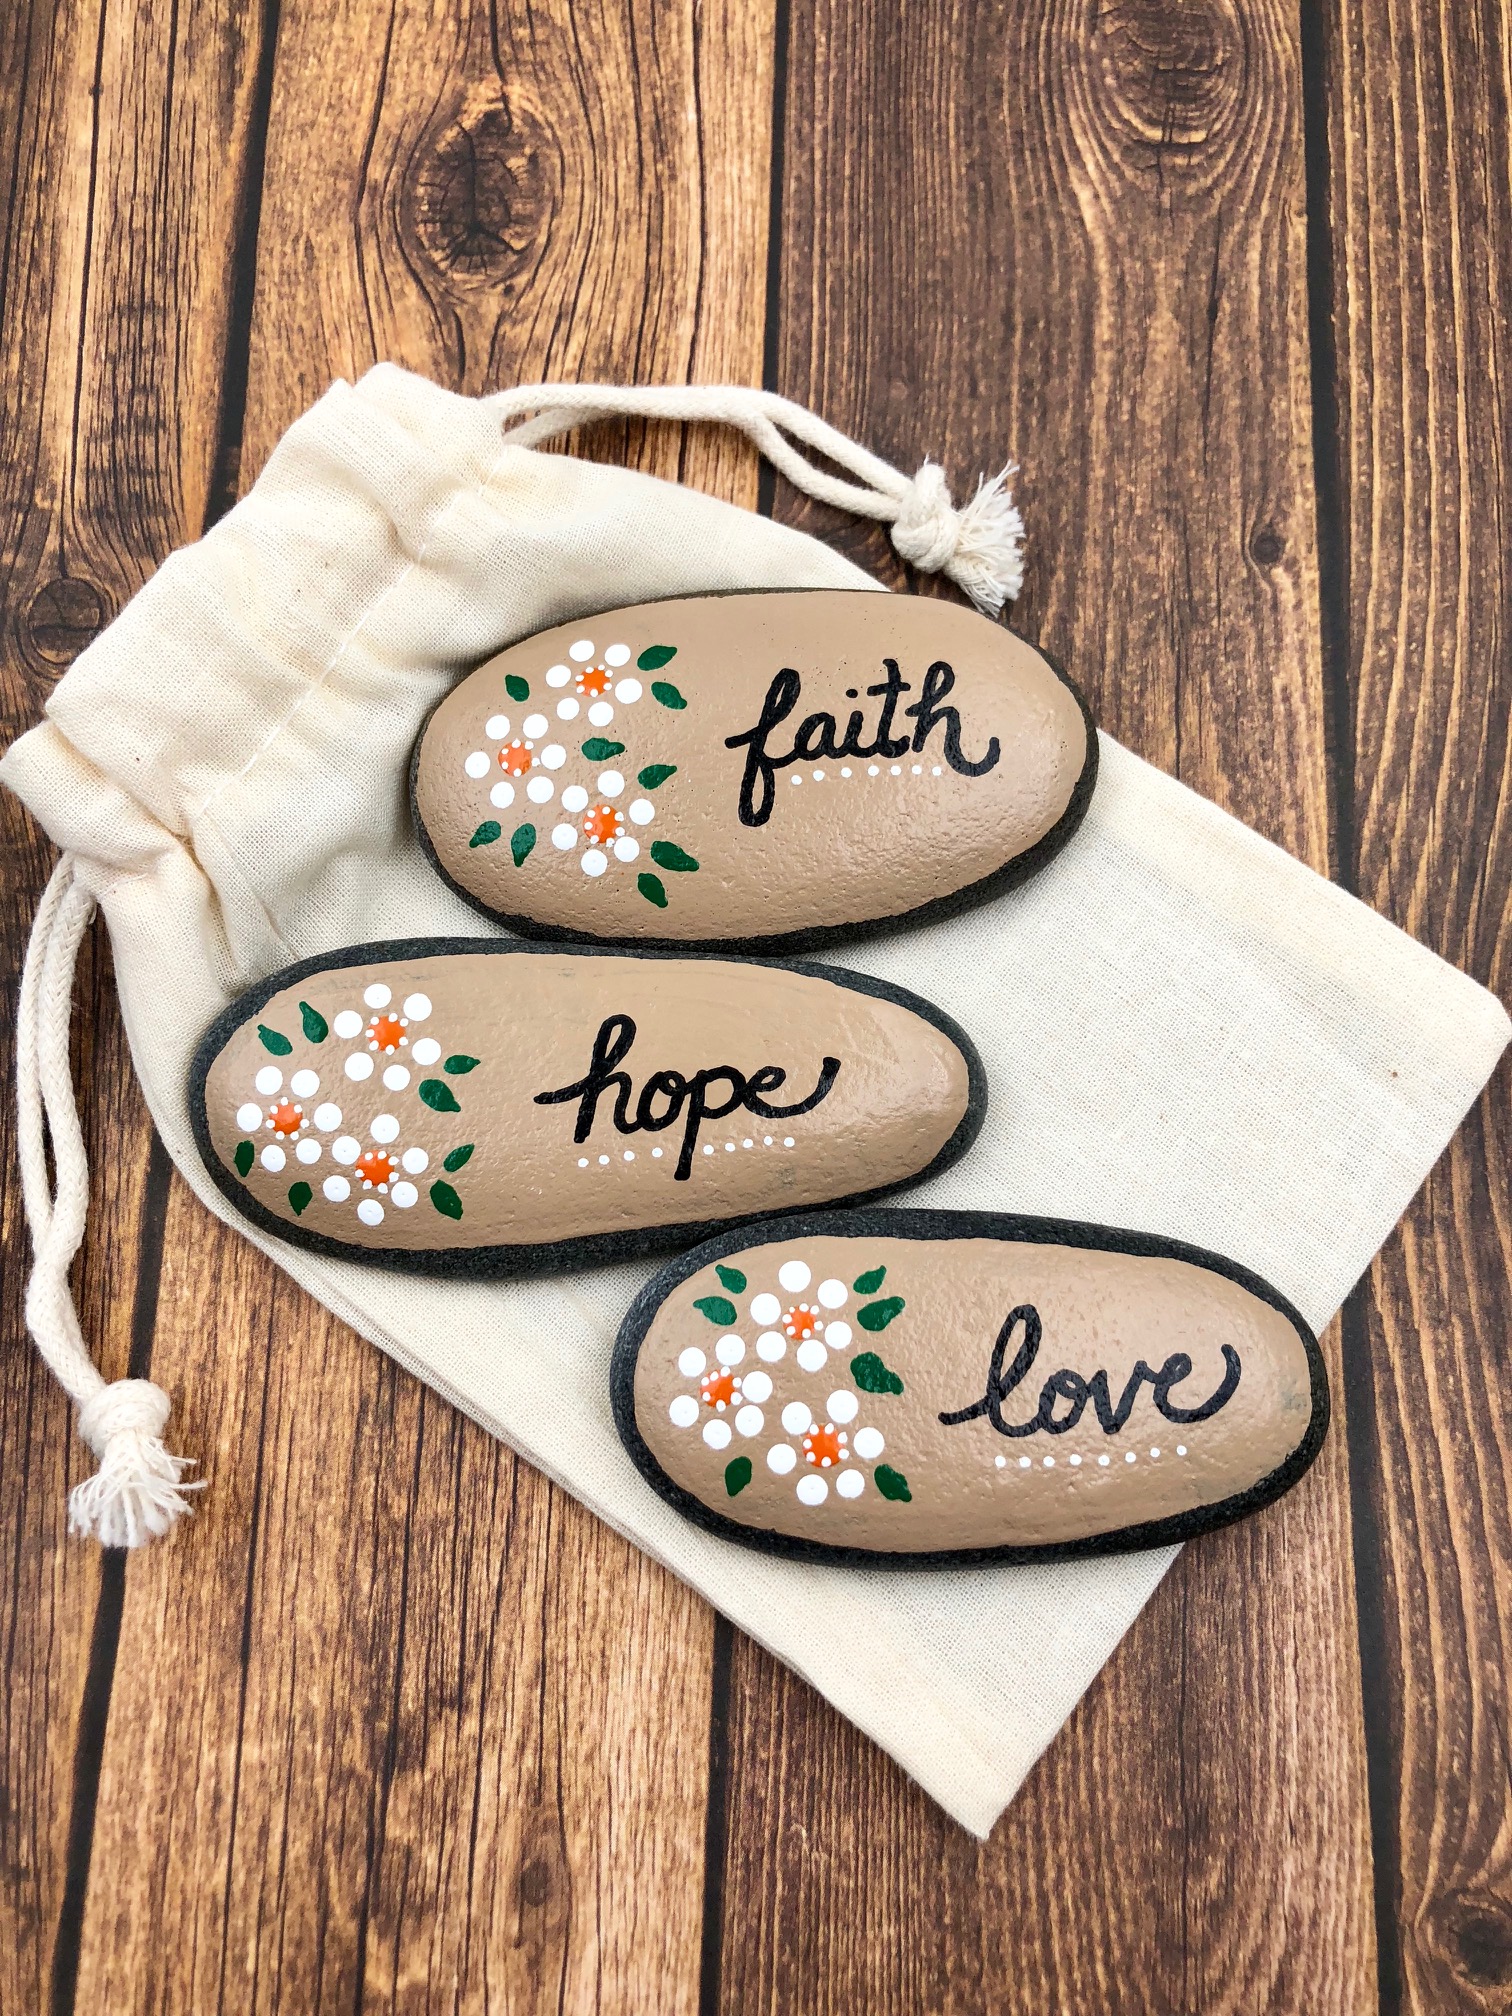 Faith, Hope, and Love Painted Stones